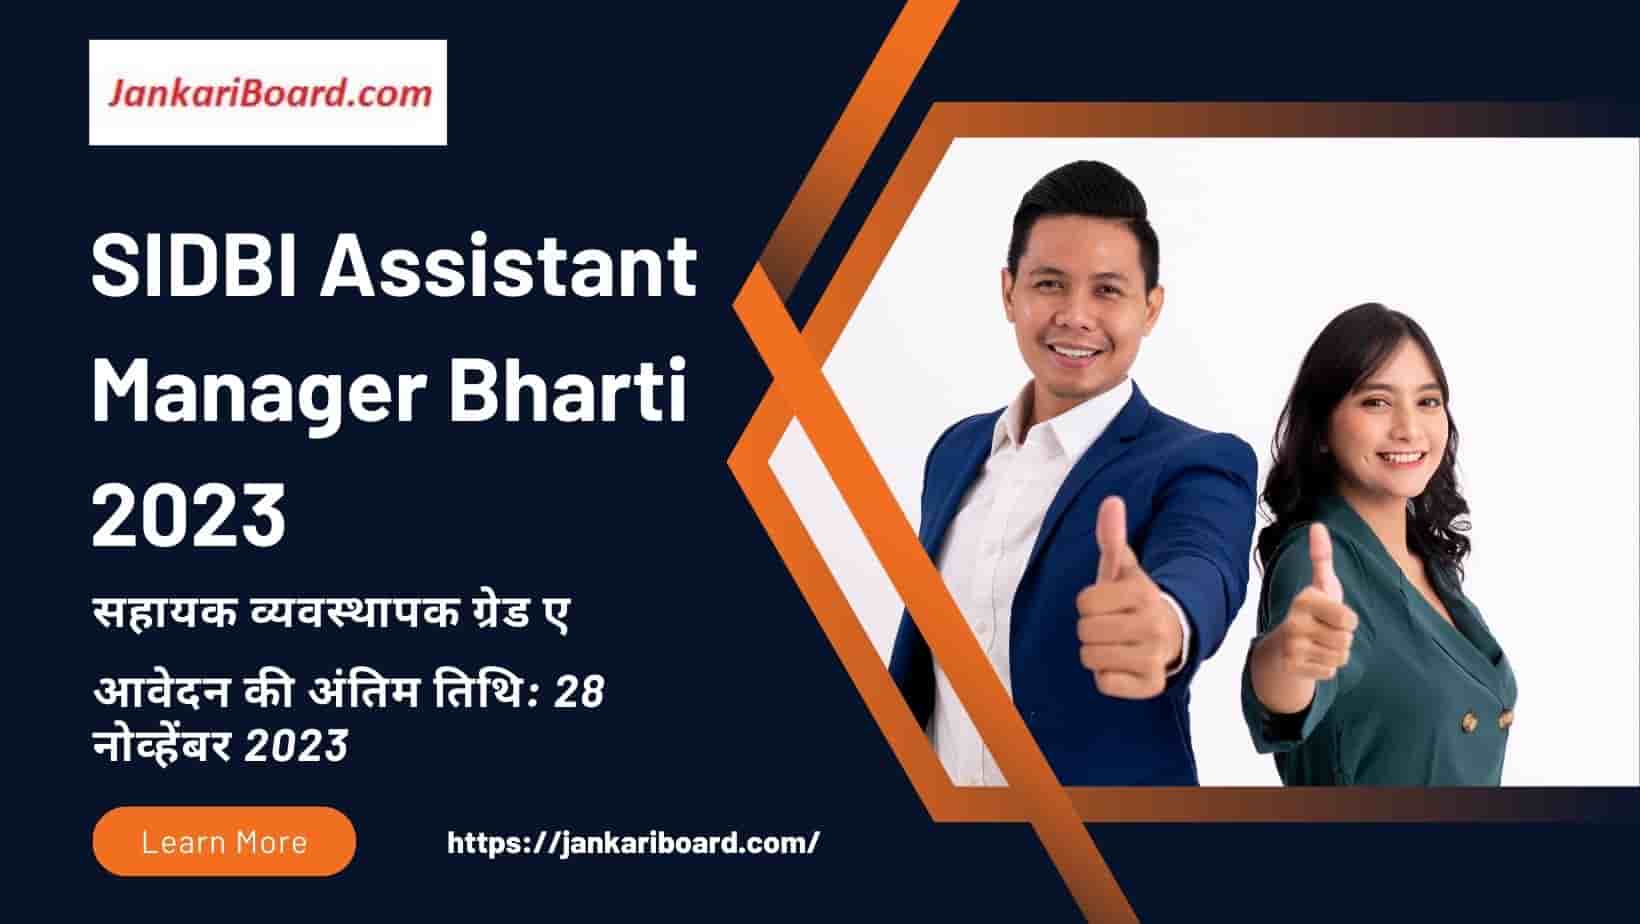 SIDBI Assistant Manager Bharti 2023